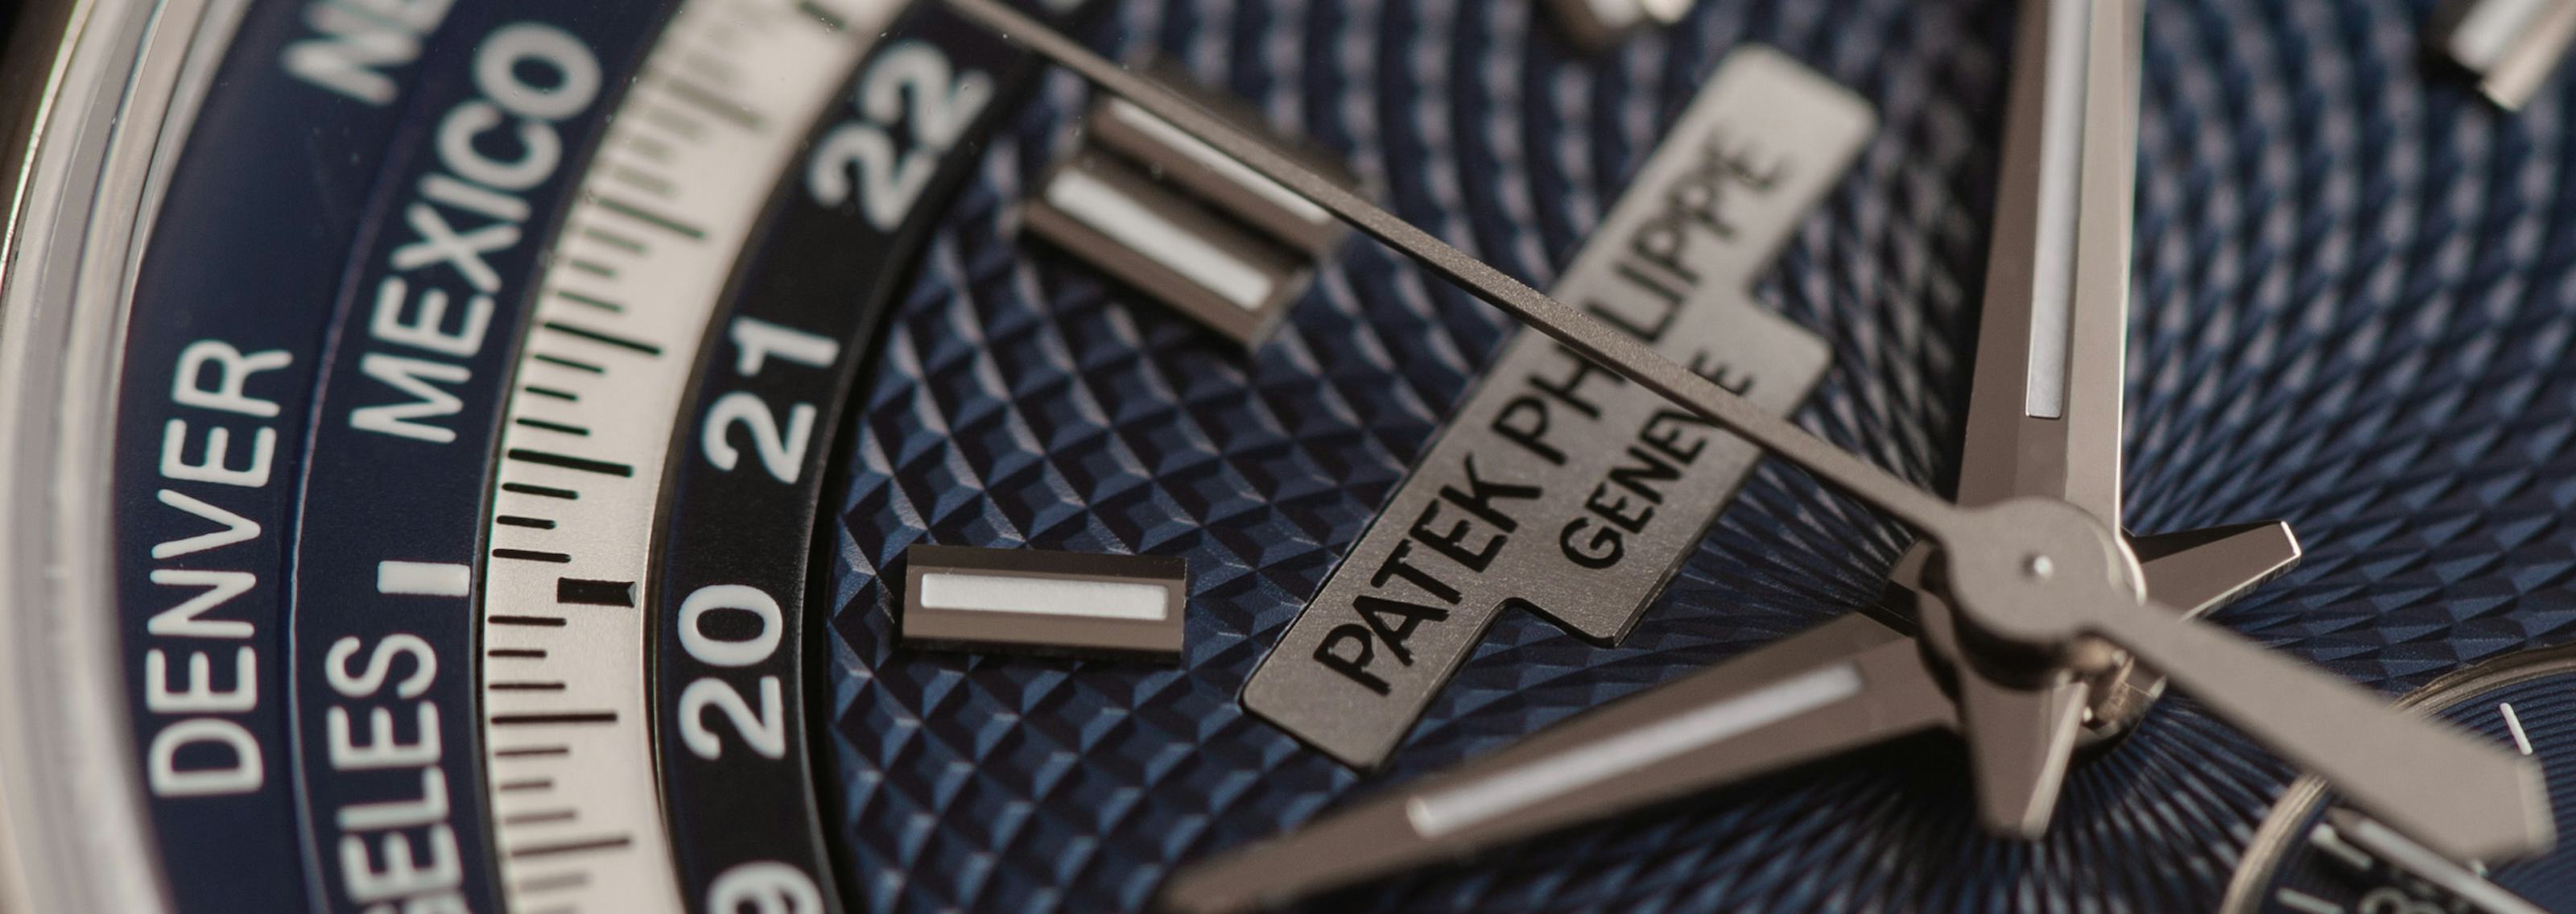 Patek Philippe: Highlights, Trends, and Predictions in 2022